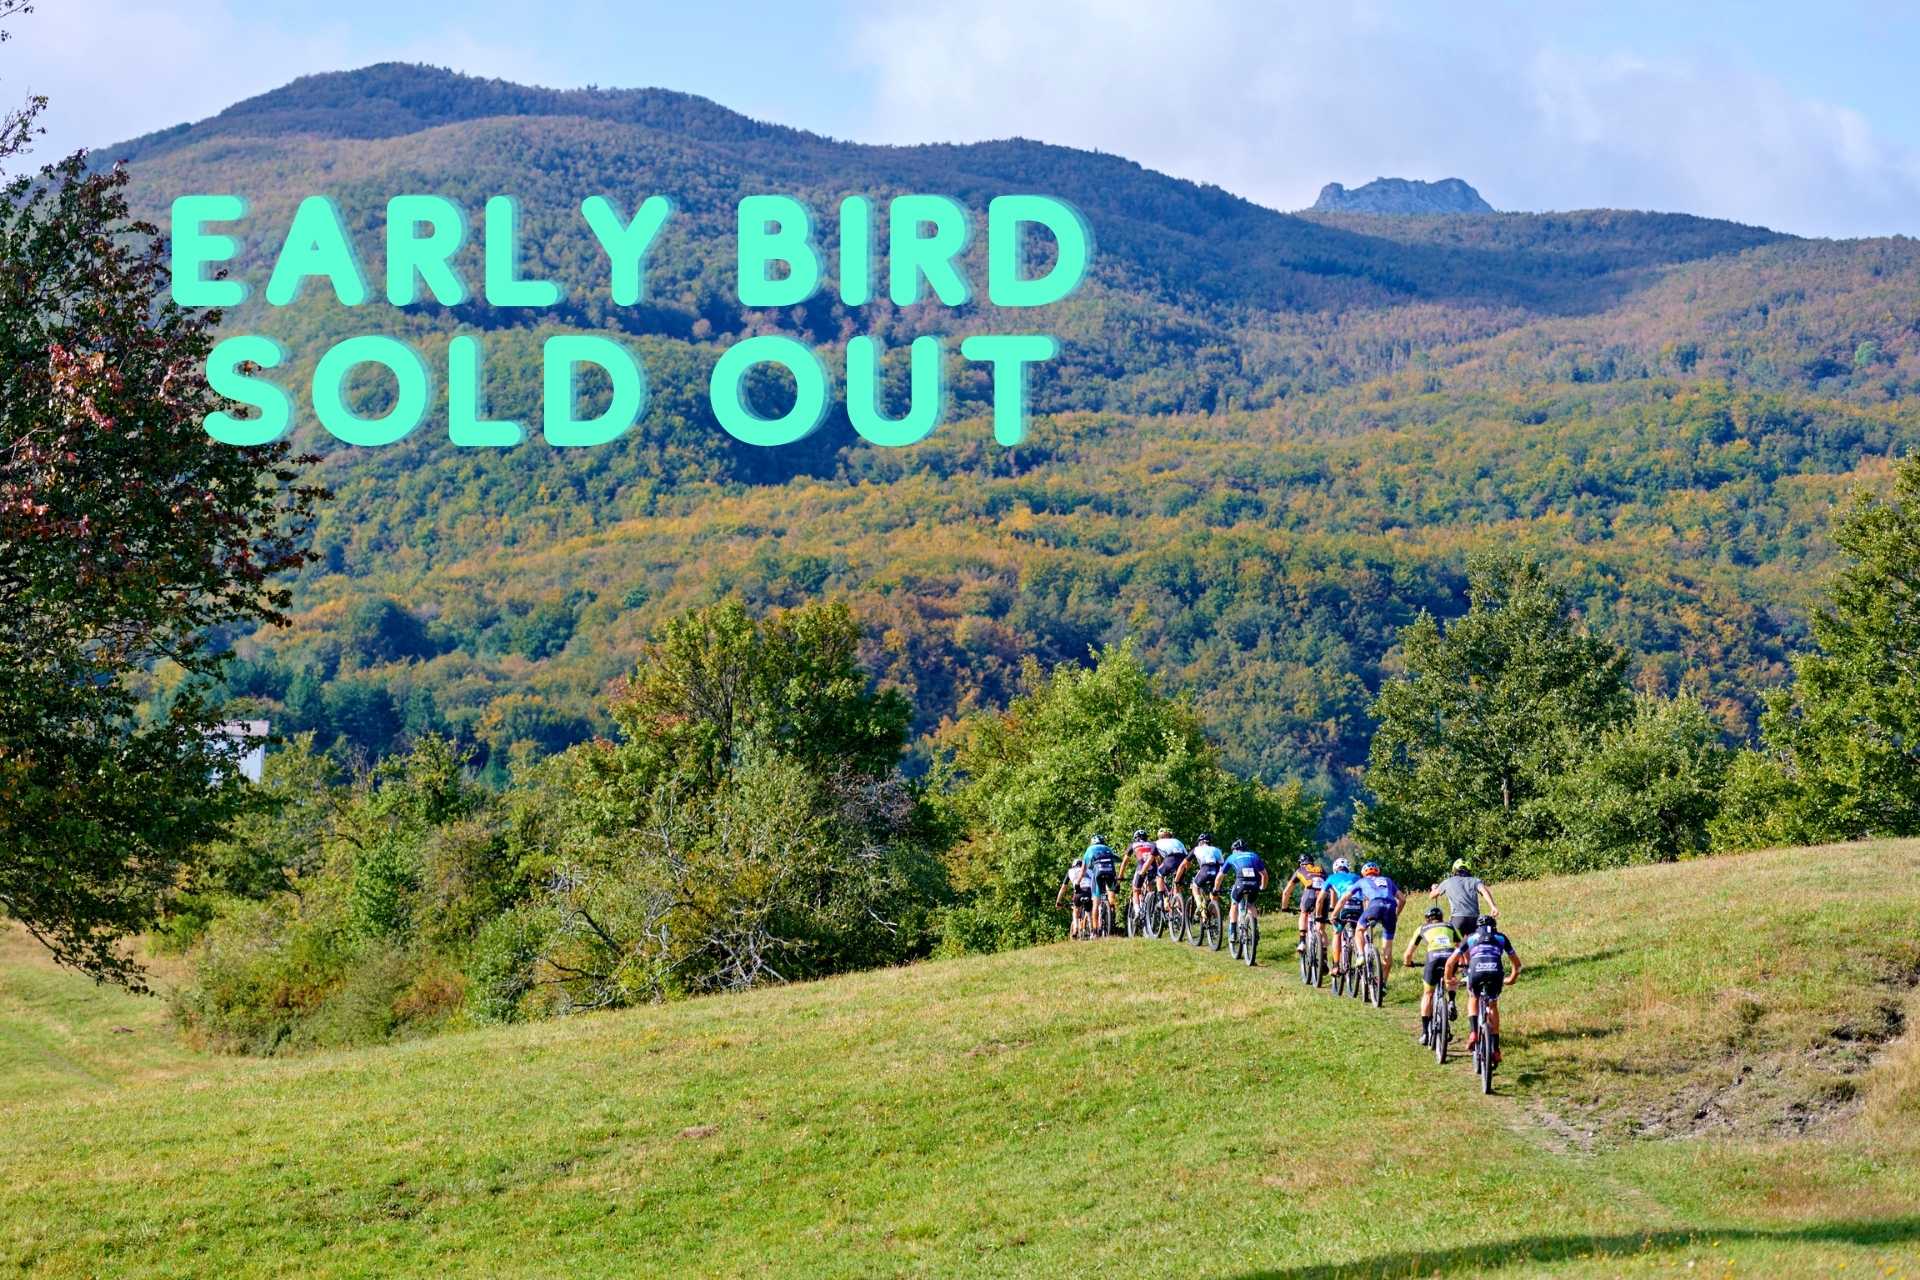 Appenninica’s Early Bird was a success: we are over 50% of participants!